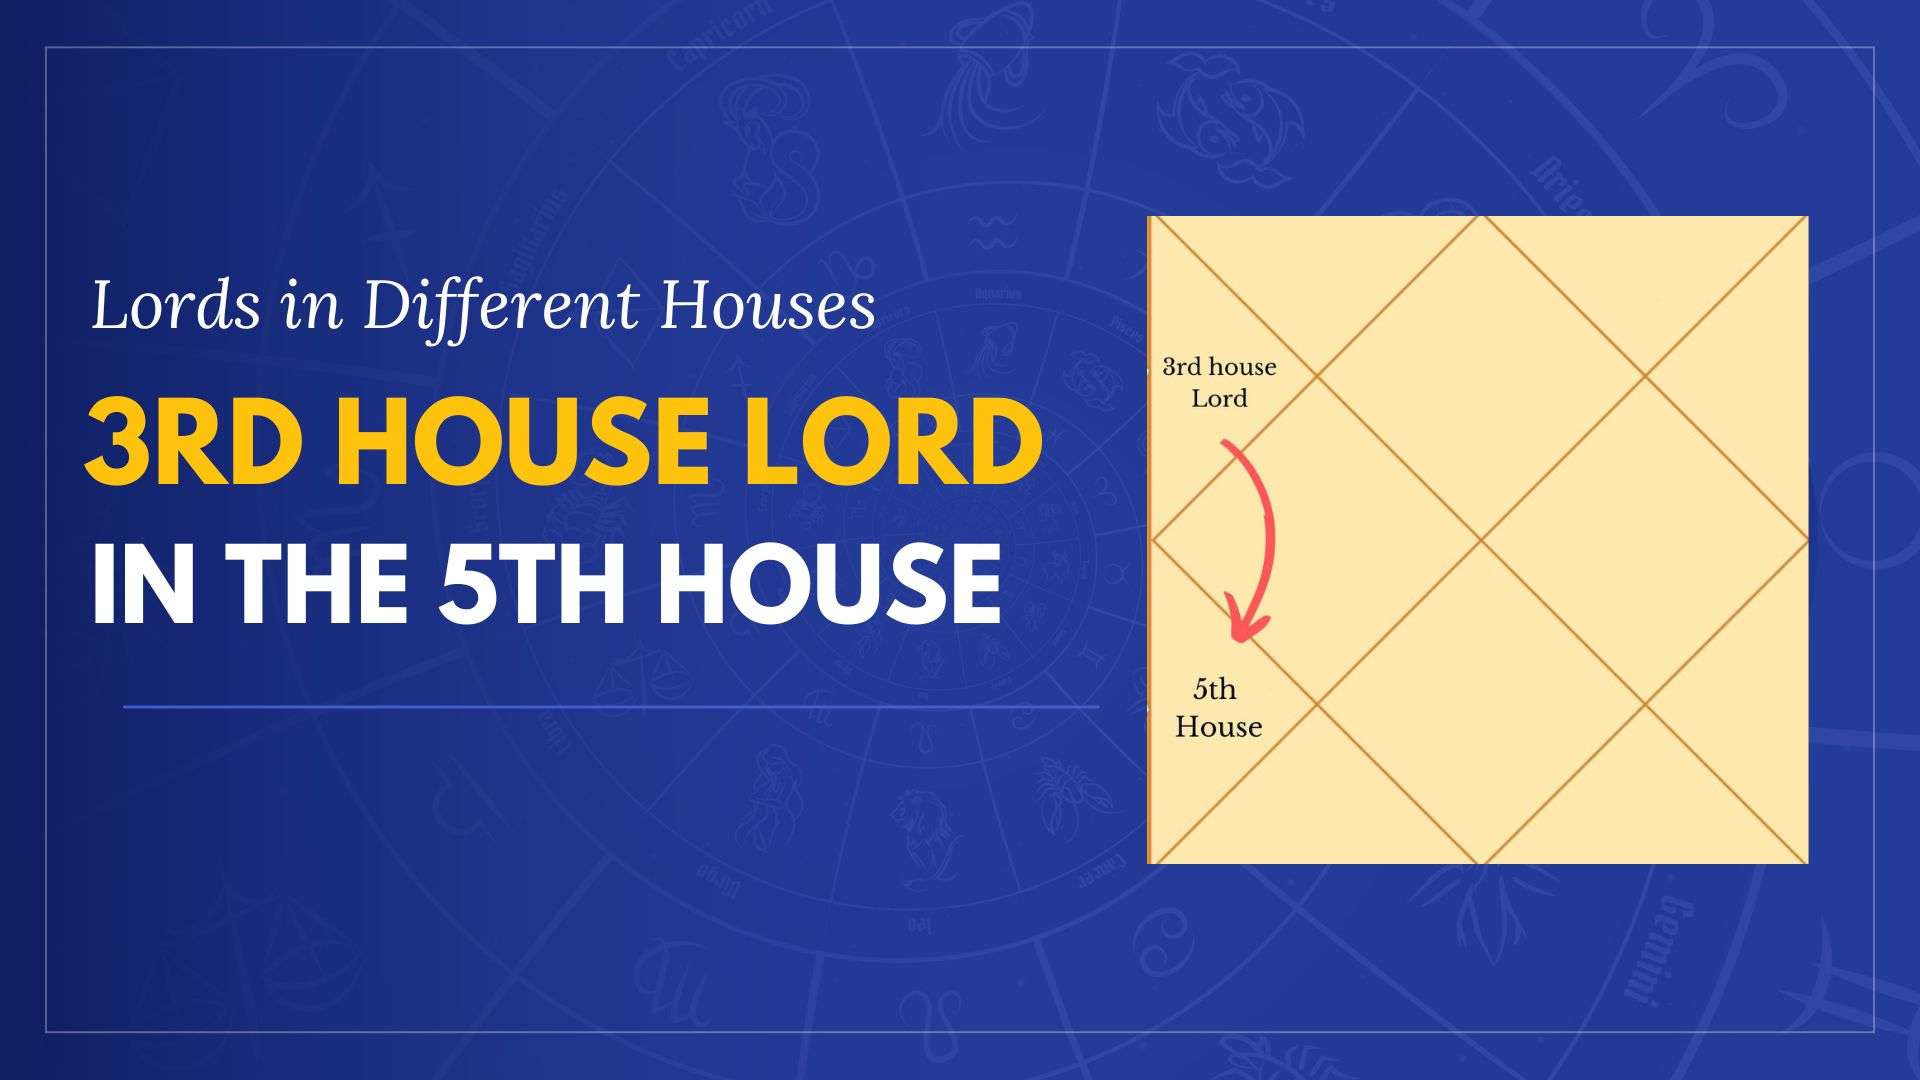 3rd house lord in the 5th house